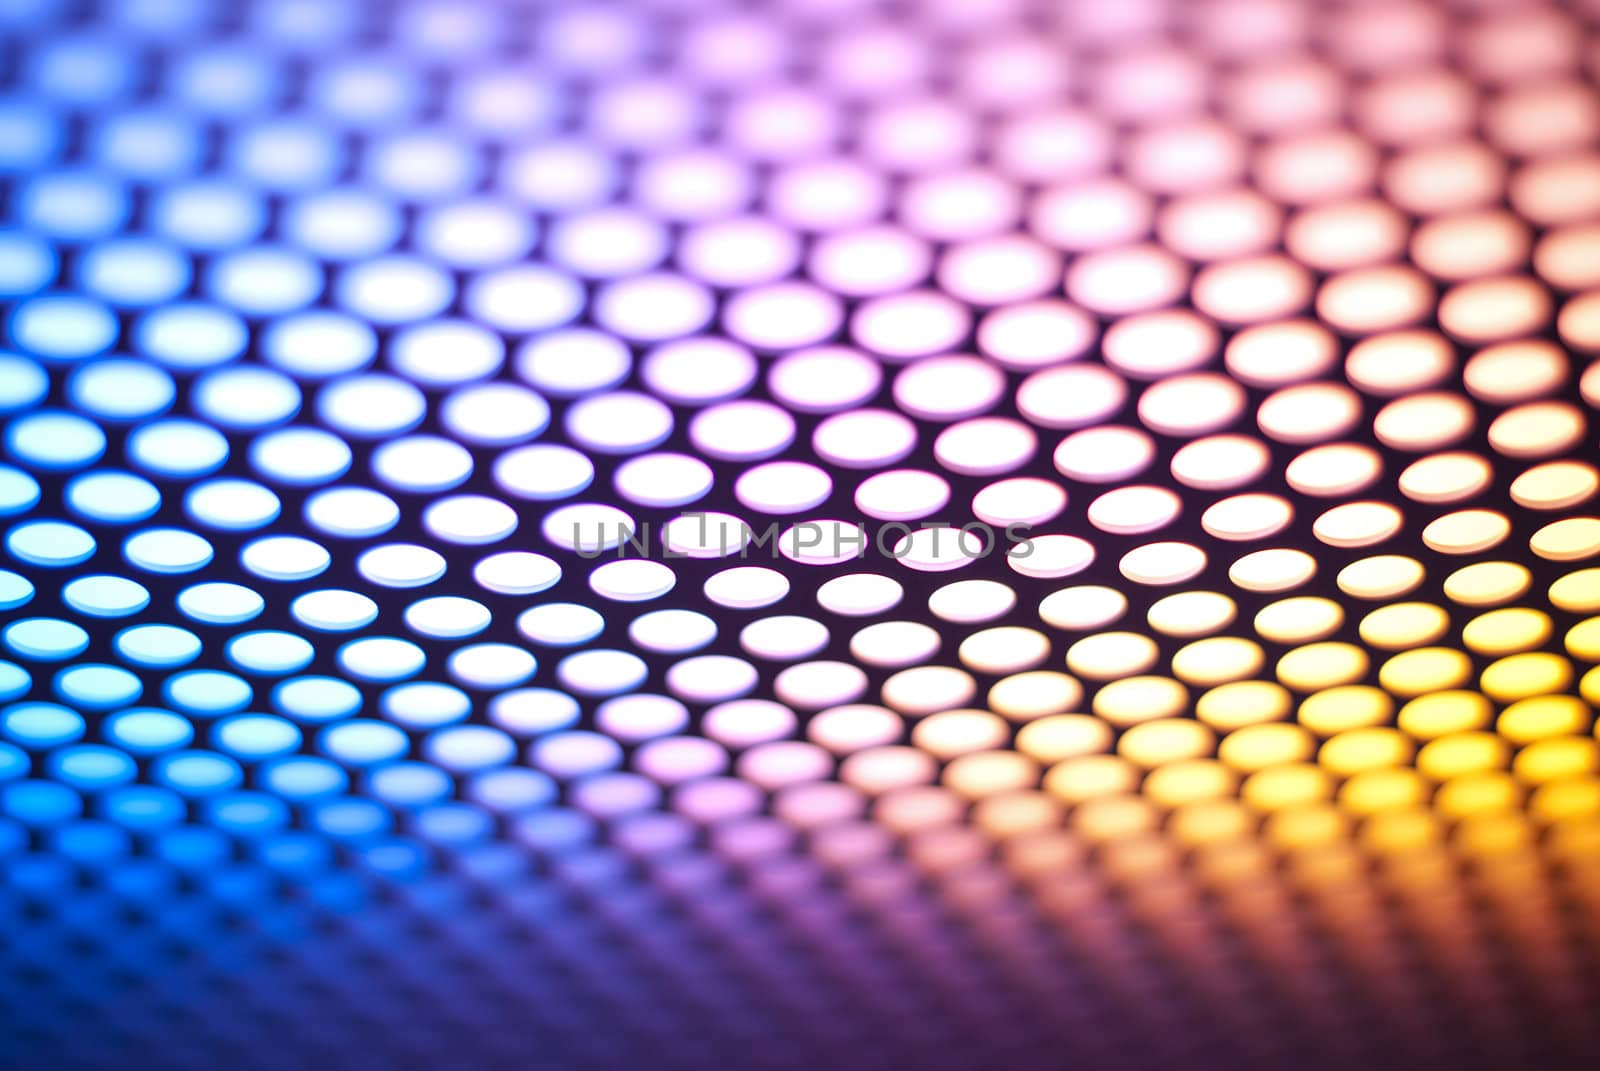 A metalic reflective surface back lit by a colorful light.